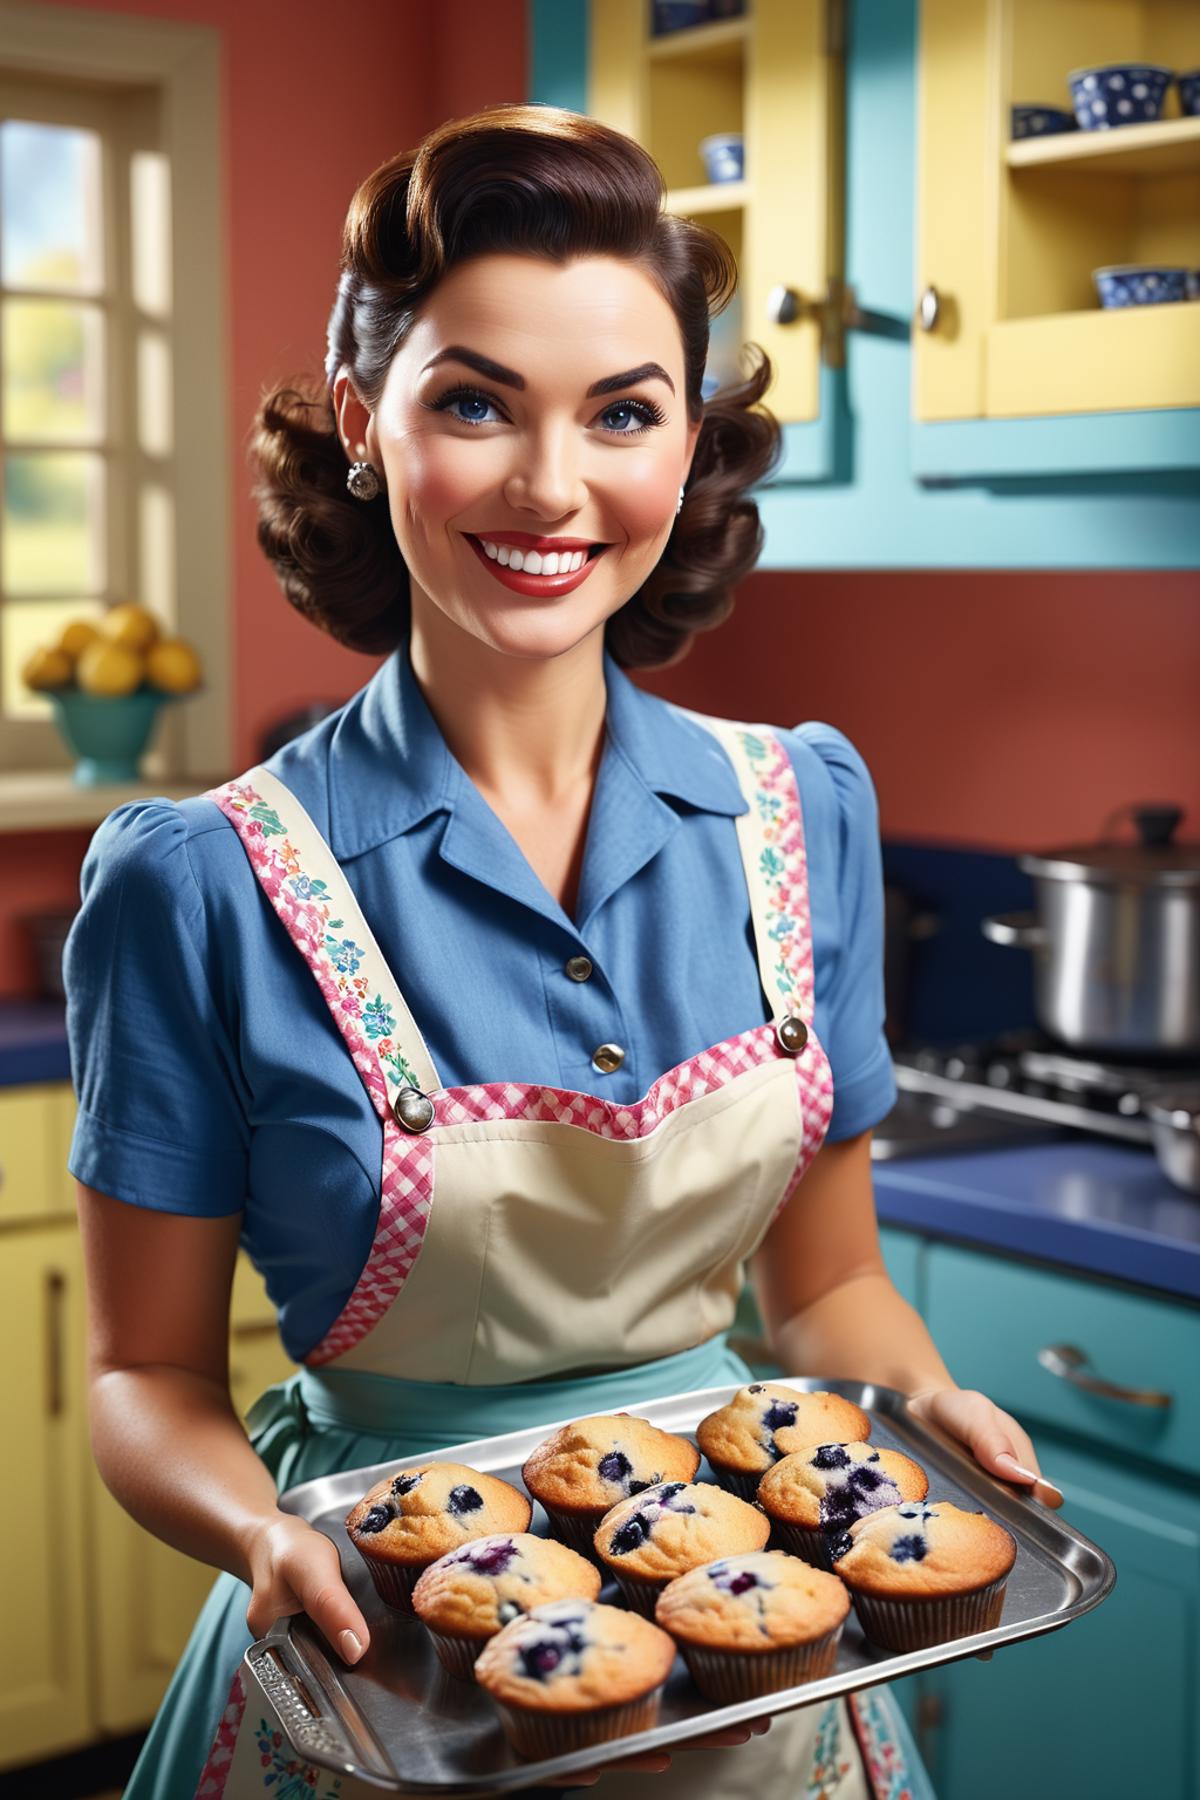 A smiling woman in a blue and white dress holding a tray of blueberry muffins.